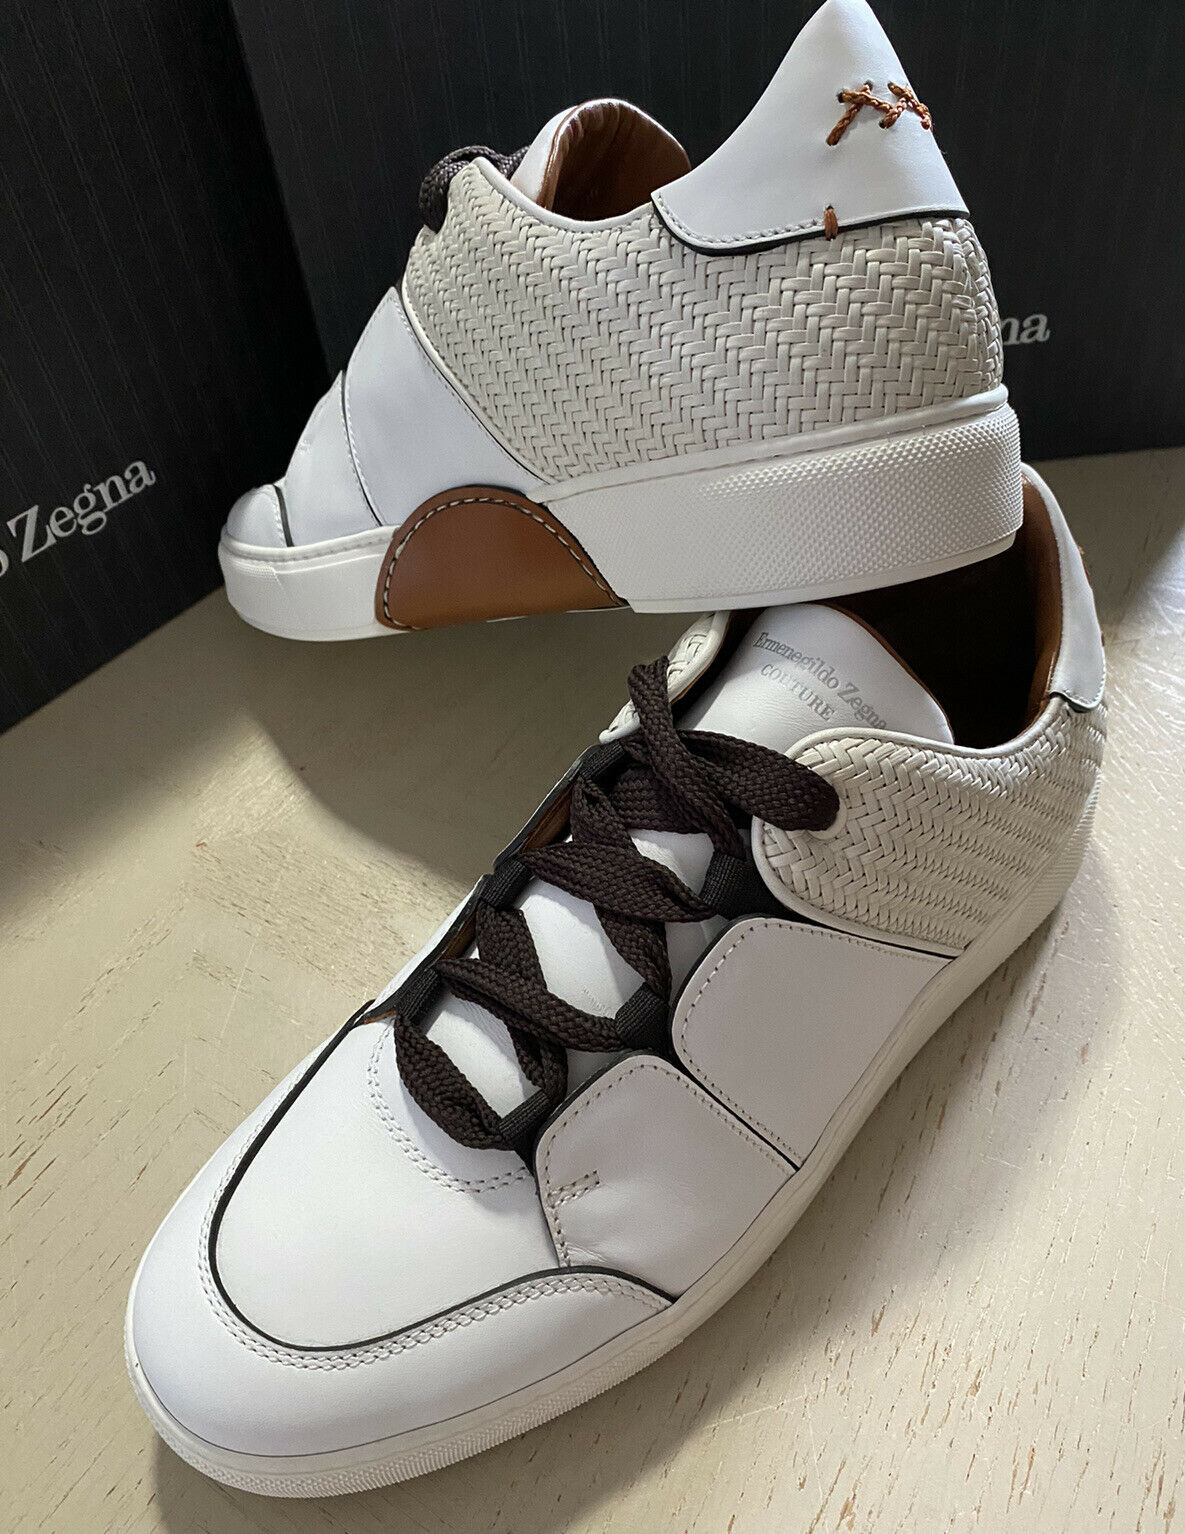 New $995 Ermenegildo Zegna Couture Leather Sneakers Shoes White 11 US Italy